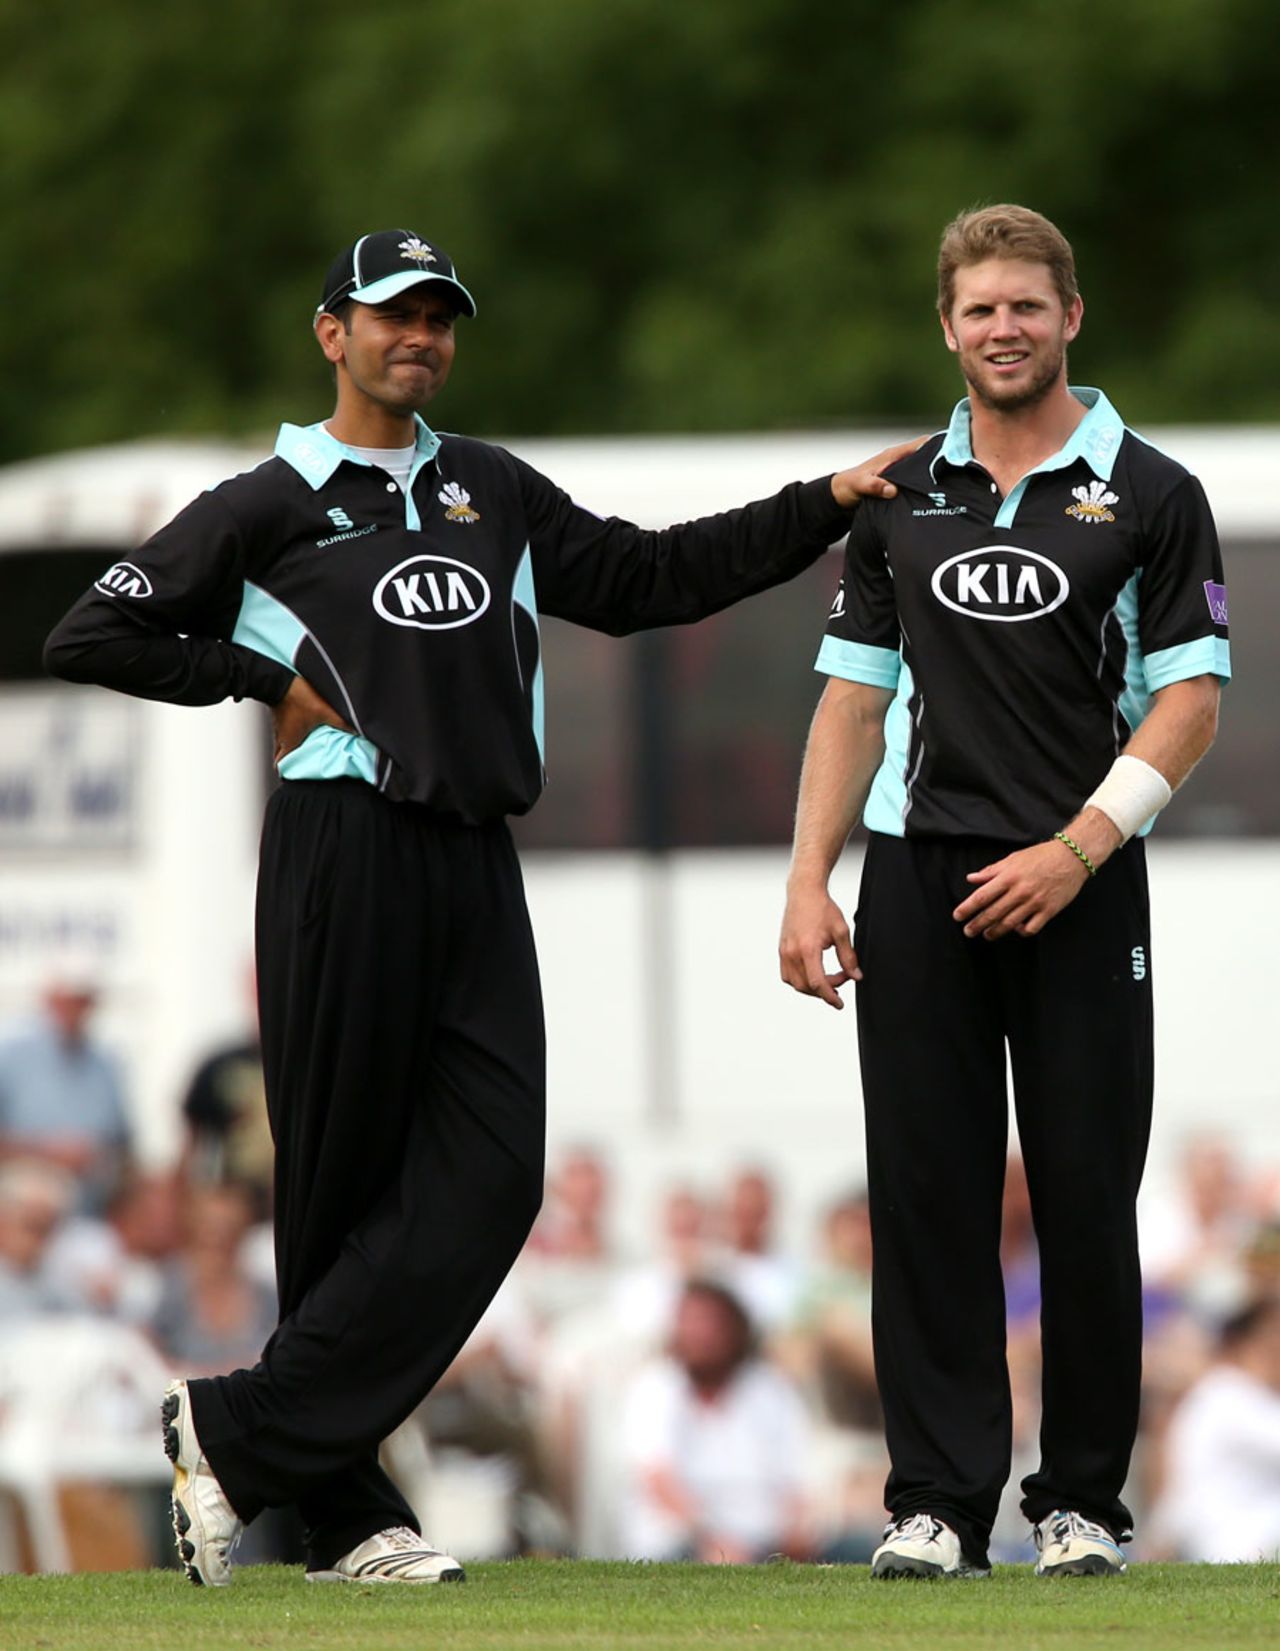 Stuart Meaker took four wickets but conceded 78 runs from 8.3 overs, Surrey v Glamorgan, Royal London Cup, Group B, Guildford, July 27, 2014